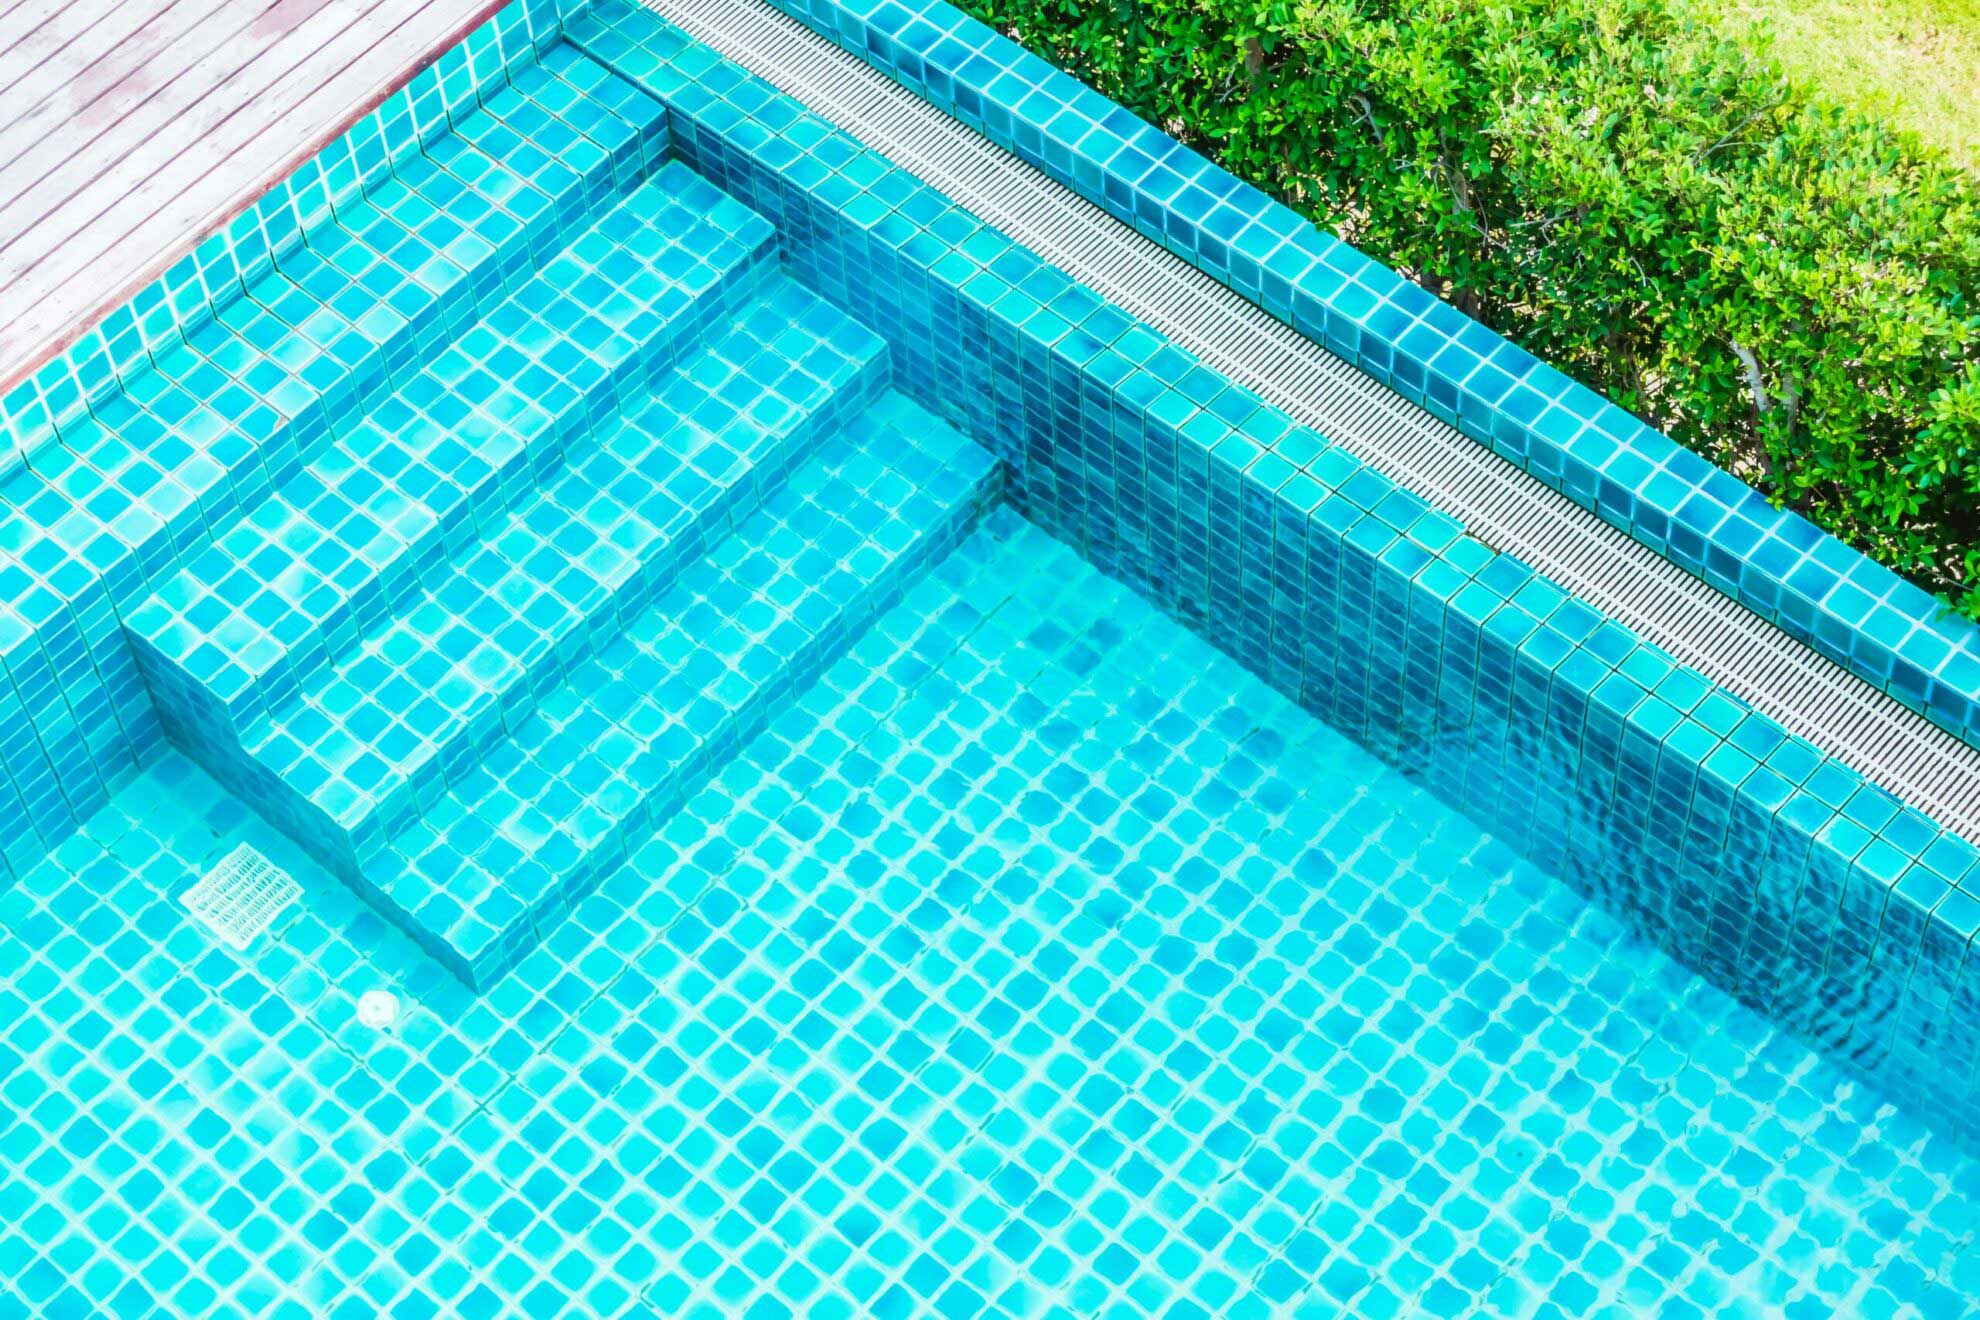 Complete Guide to Preventative Maintenance for Pool and Spa Facilities